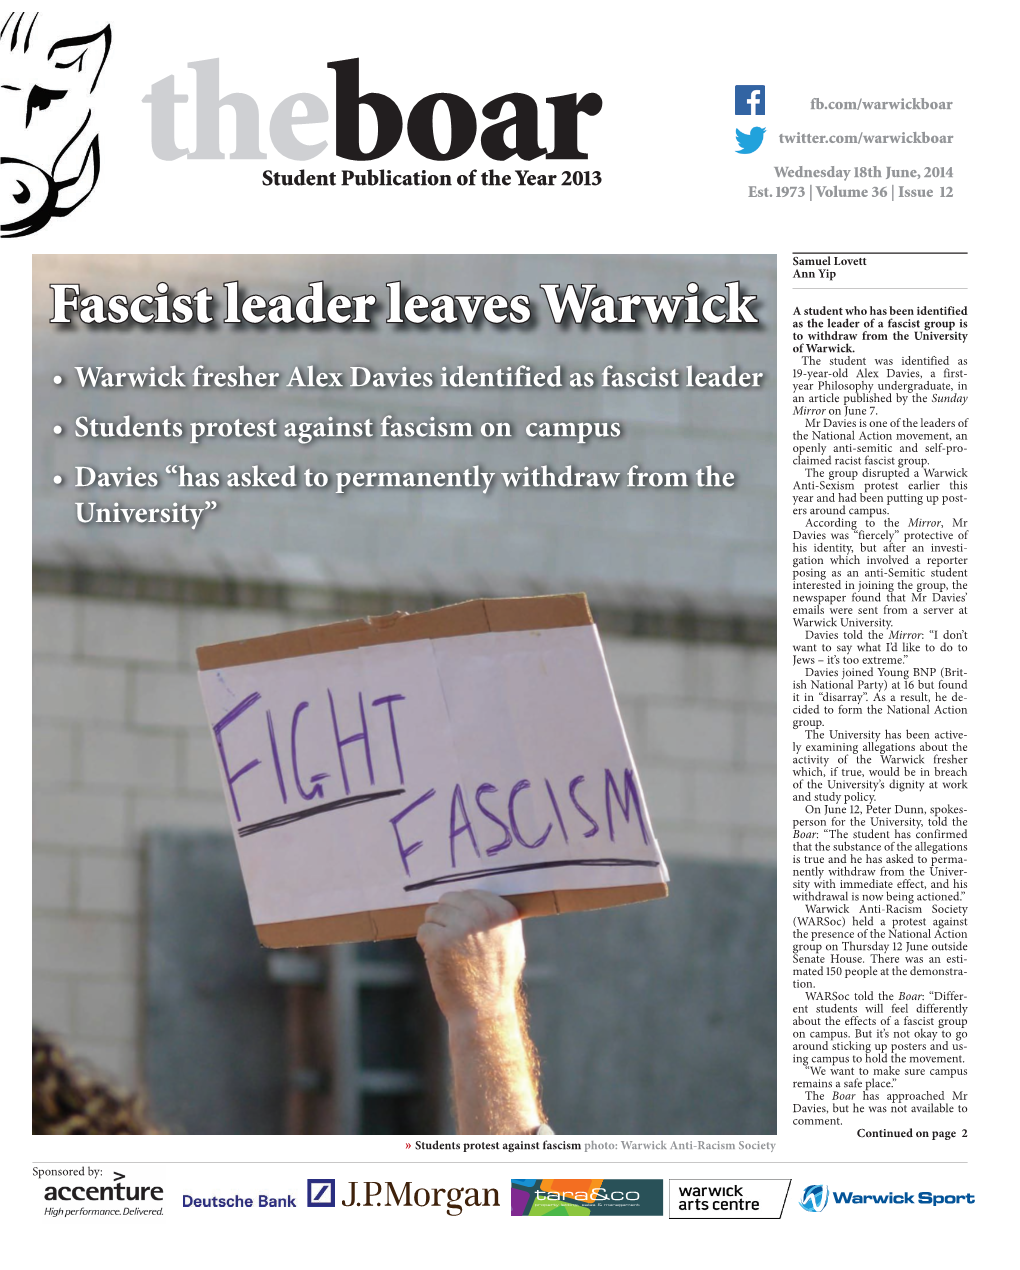 Fascist Leader Leaves Warwick As the Leader of a Fascist Group Is to Withdraw from the University of Warwick